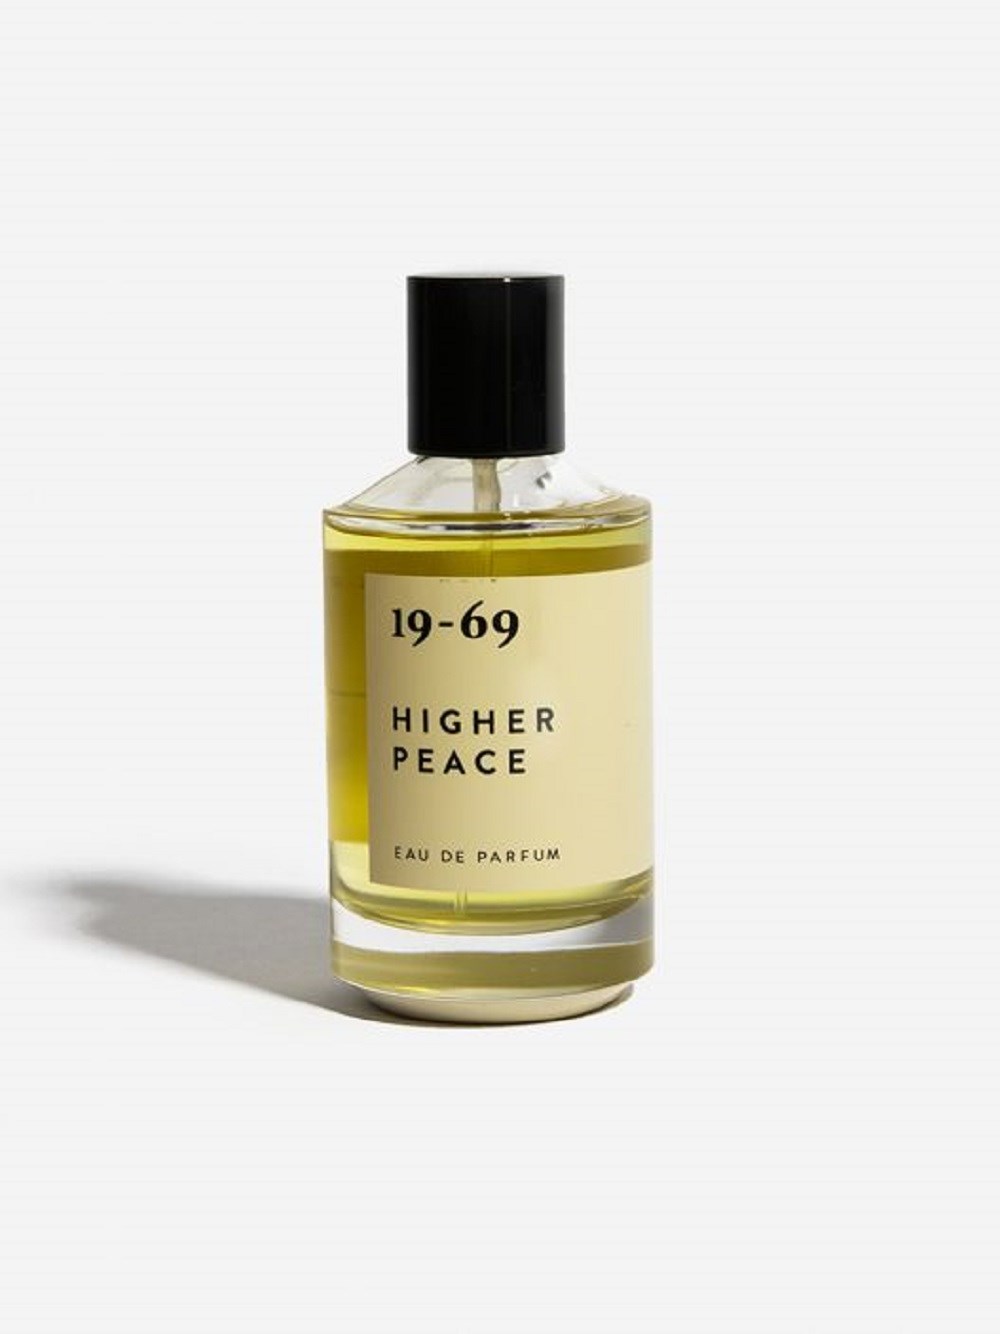 19-69 Higher Peace Edp Article 100 ml In Nude & Neutrals